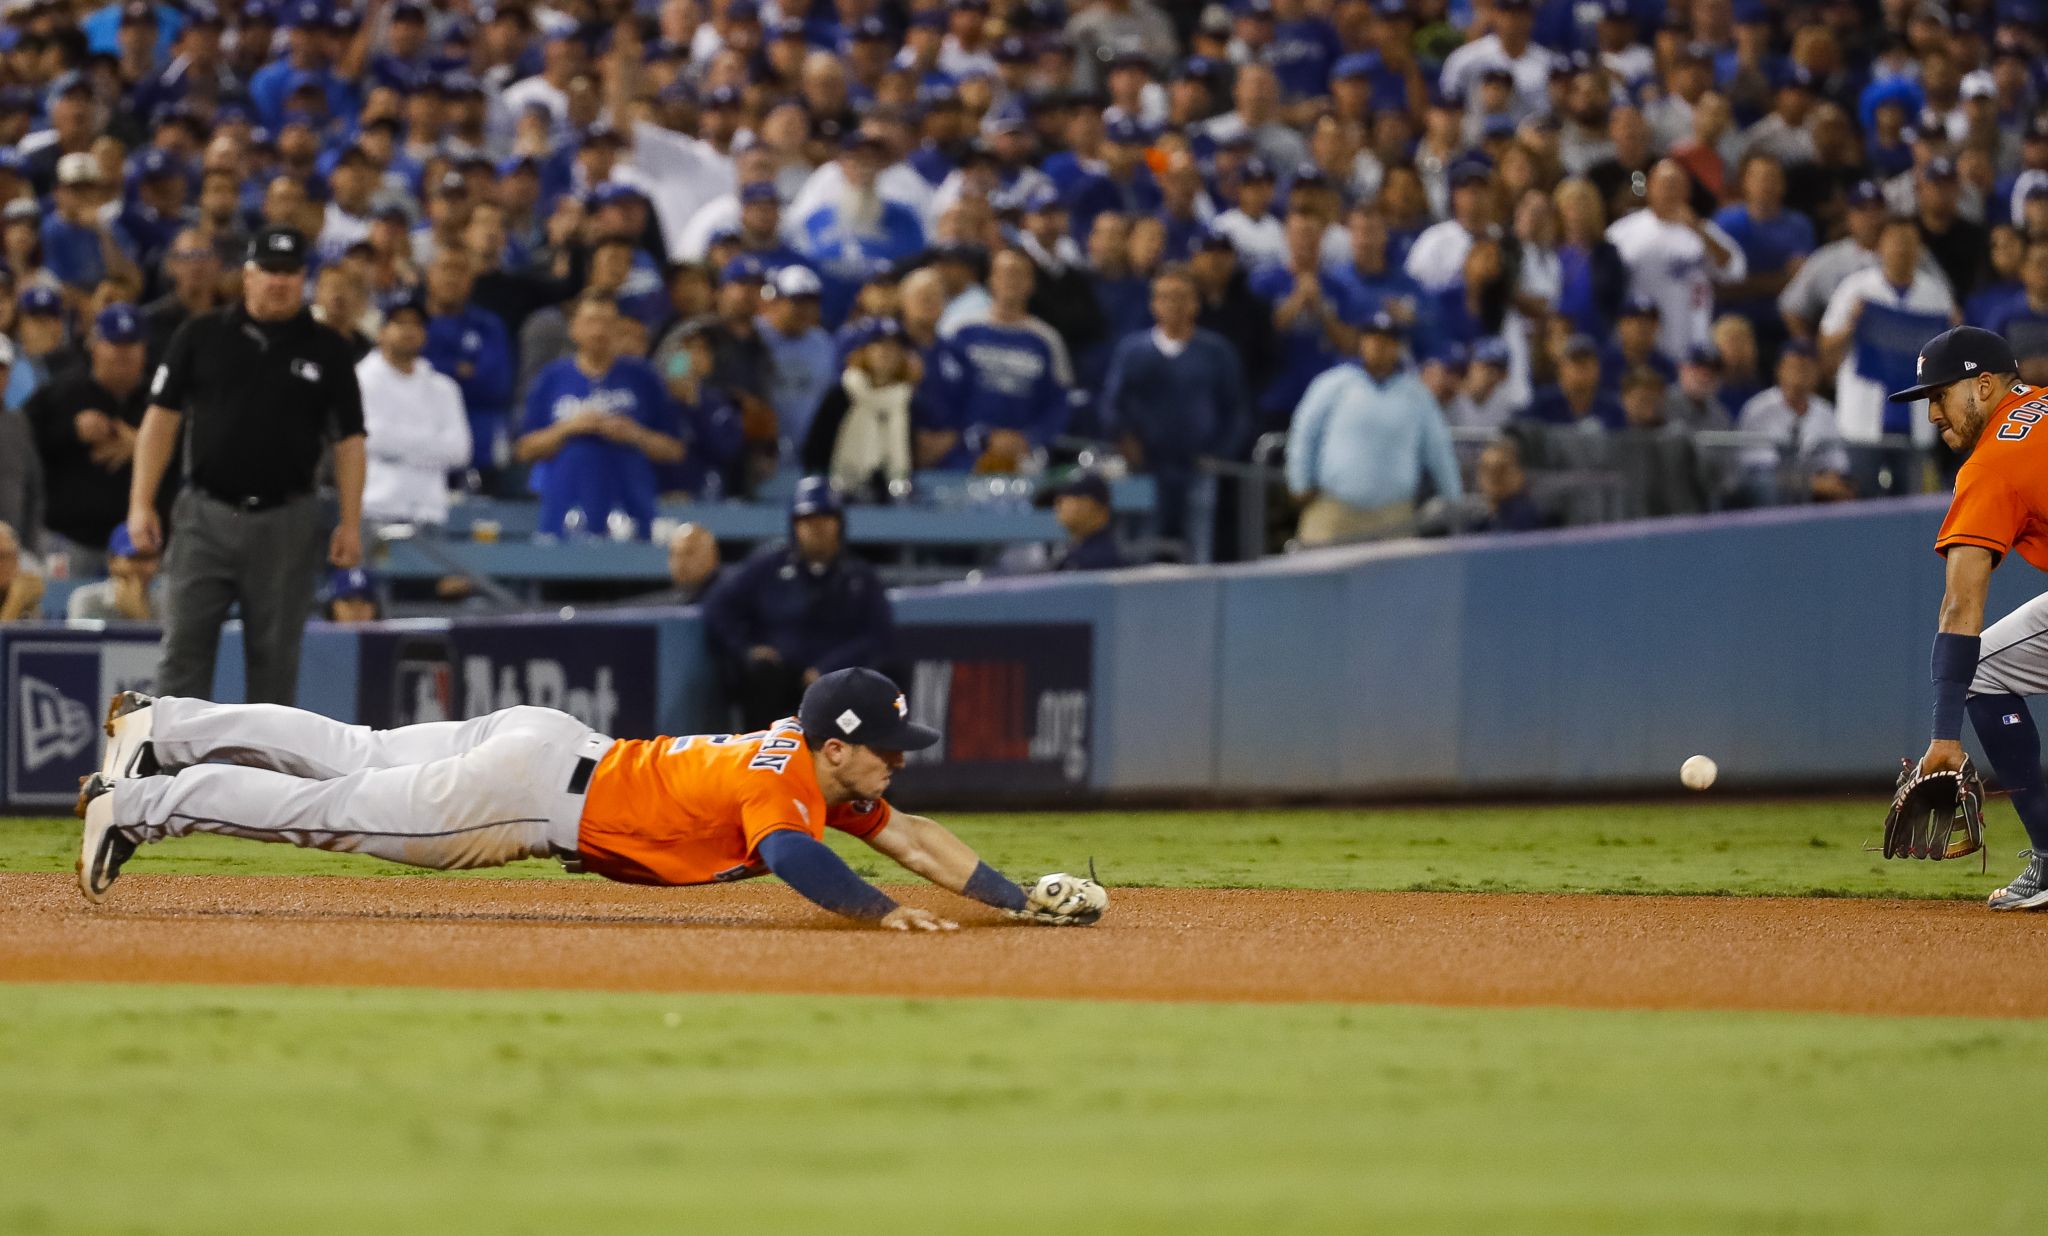 Astros beat Dodgers 5-1, clinch first World Series title in franchise